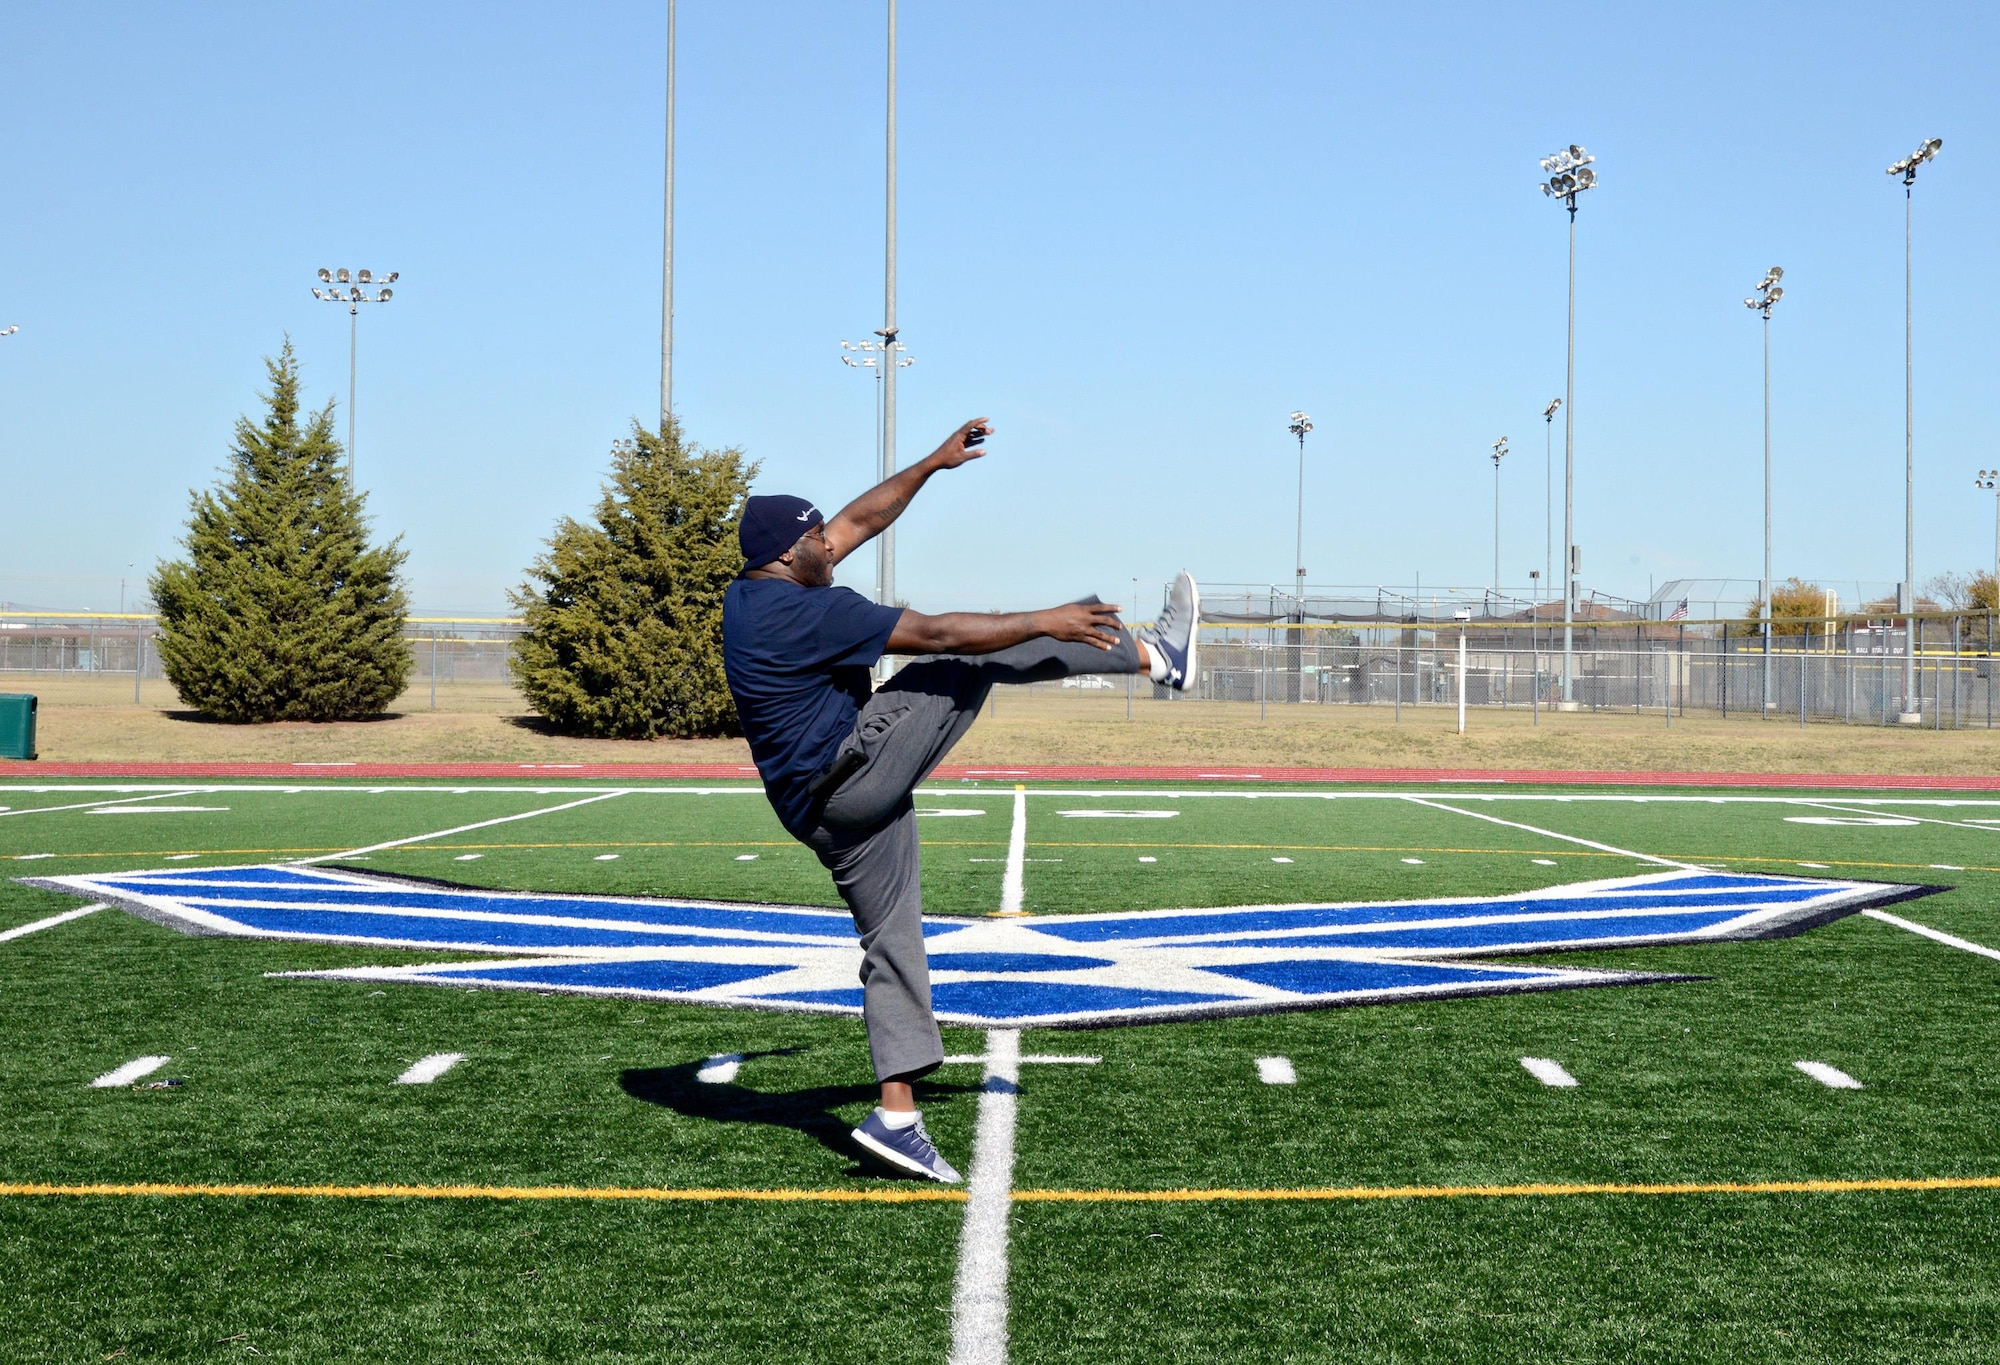 Marcus Baucom, with the Fit Assessment Cell (FAC), shows participants how far they need to kick the football for the longest kick contest in the Great American Smokeout Kickoff event Nov. 16. Health Promotions partnered with the Gerrity Gym at the Tinker football field and track to bring awareness and fun to the event with the longest throw and the longest kick contest to encourage tobacco users to “go the distance and kick the habit!” The winner of the longest kick was Brett Kearney and the winner of the longest throw was Capt. Zach Fleming. Health Promotions had a table filled with tobacco cessation kits and other valuable information. (Air Force photo by Kelly White)